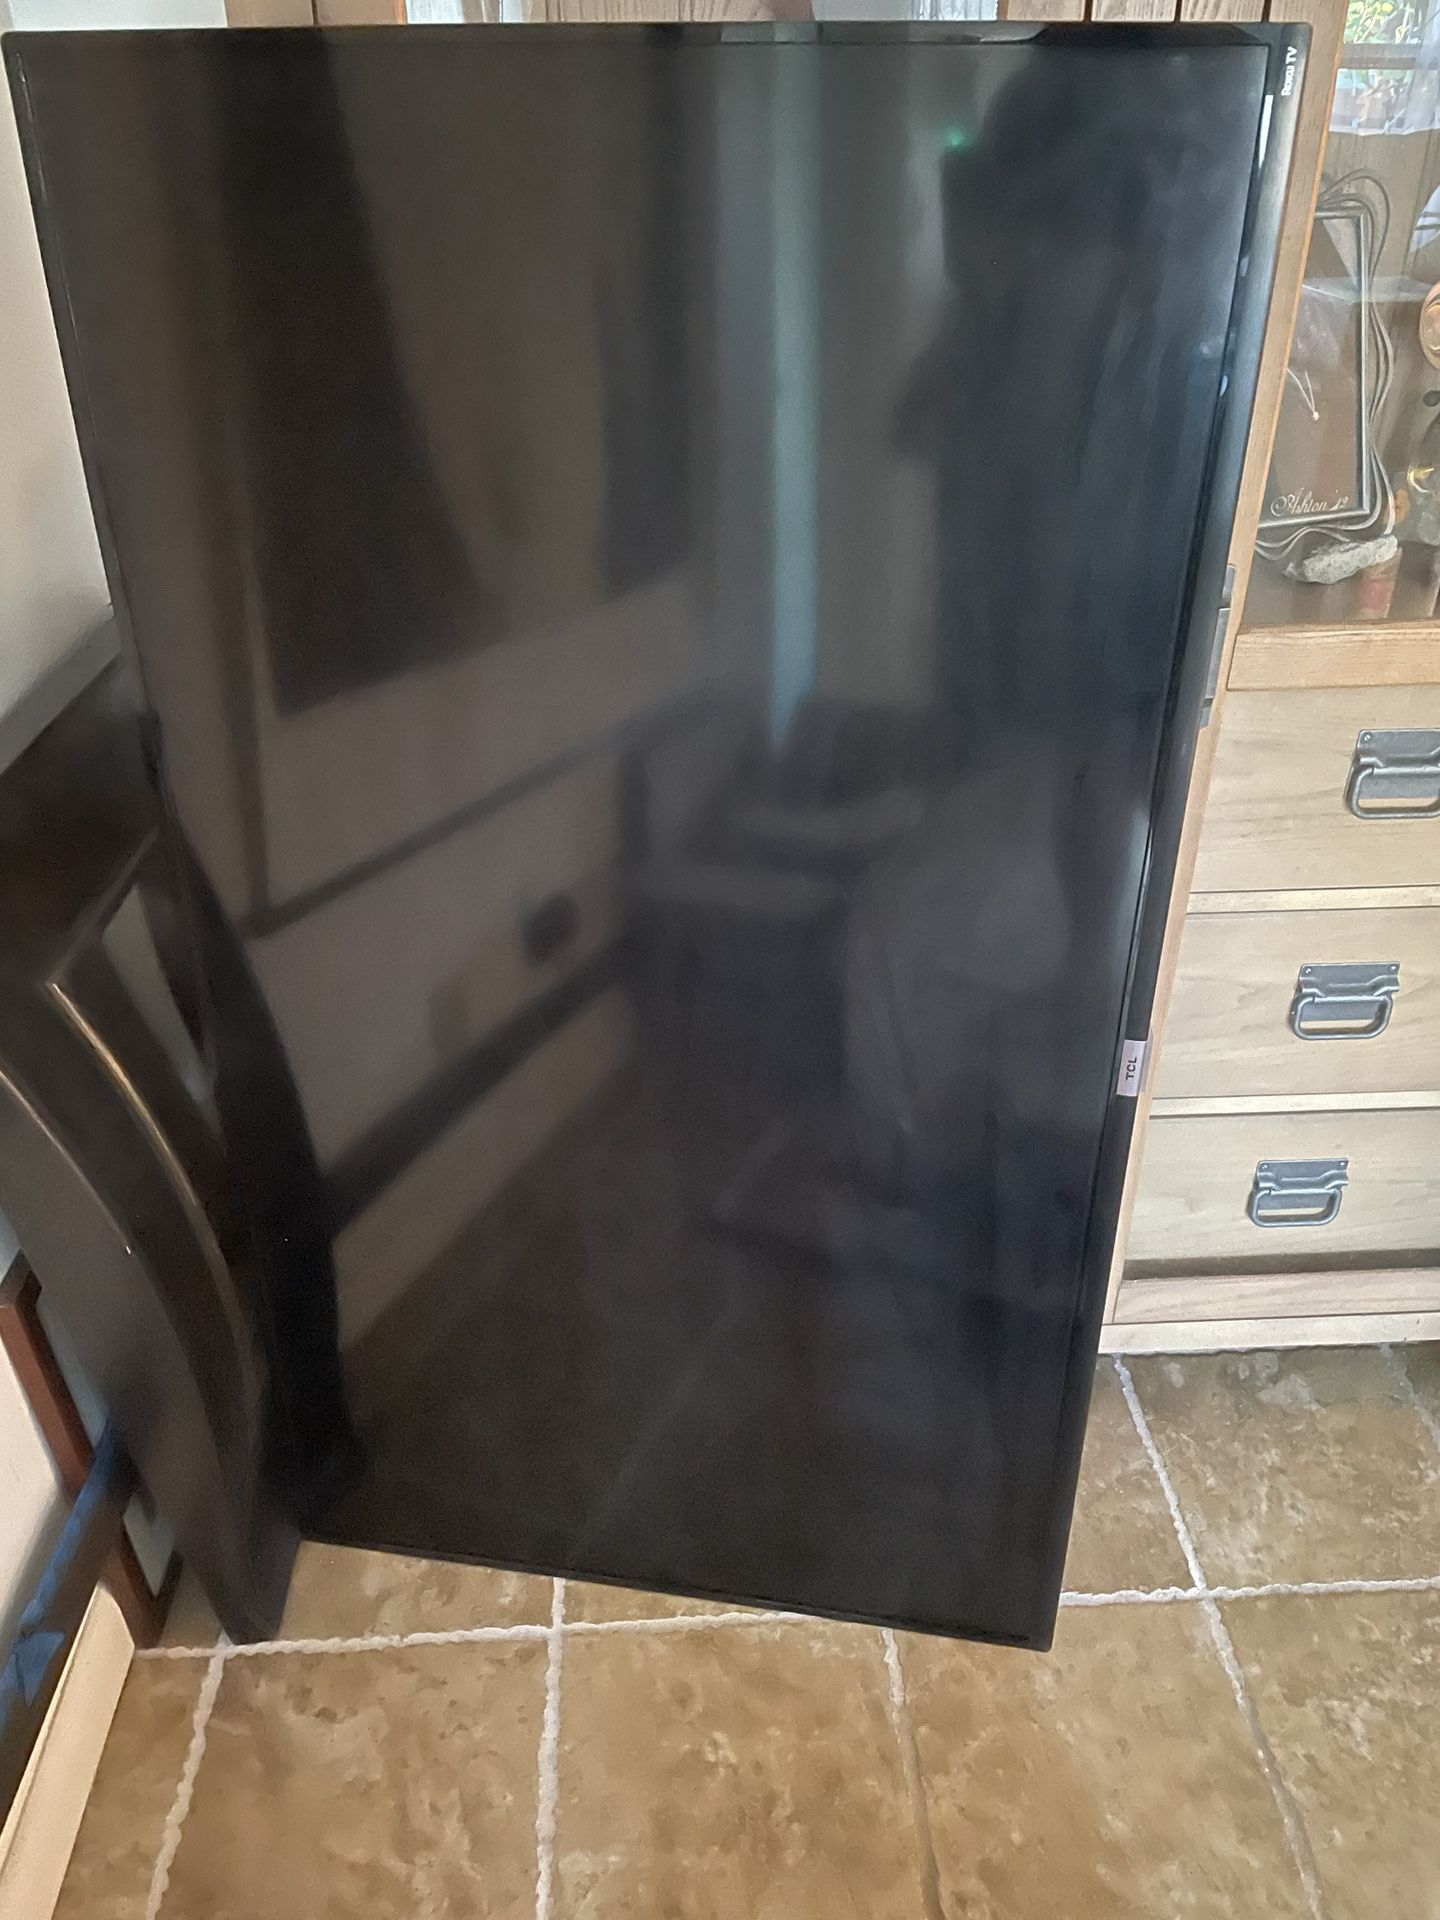 55” TCL  Roku TV And Other Electronics